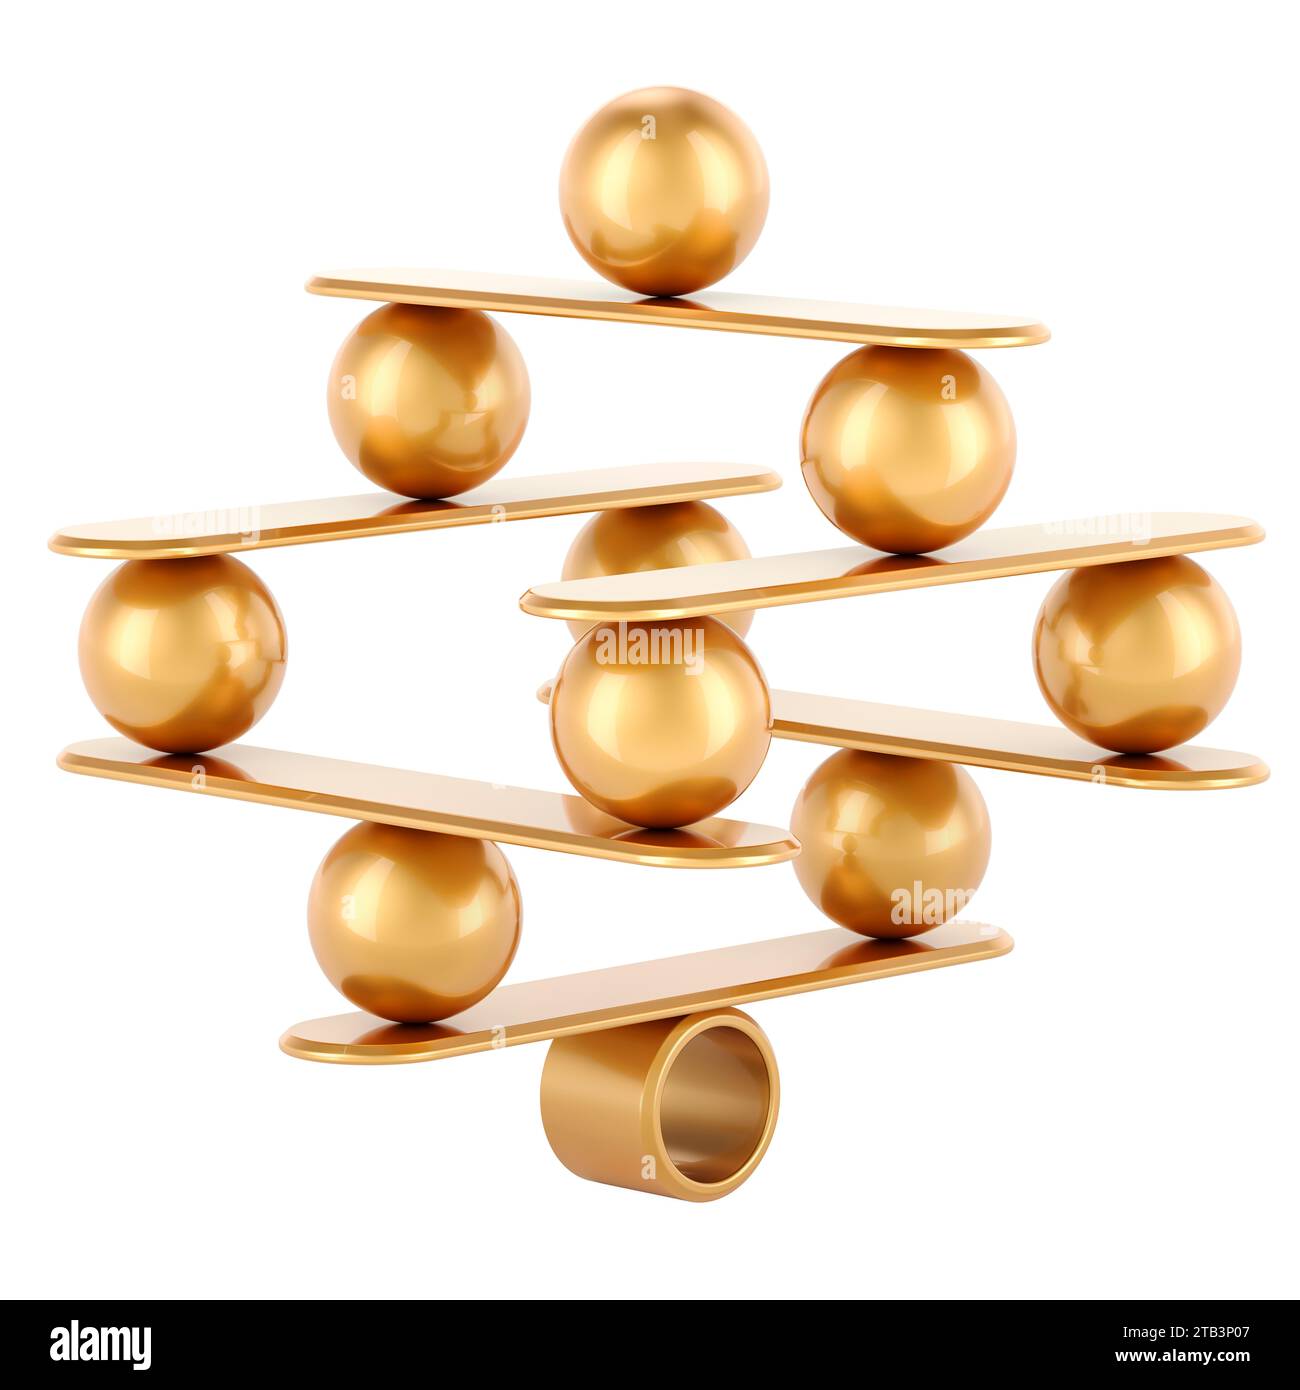 Balance concept with balls, 3D rendering isolated on white background Stock Photo